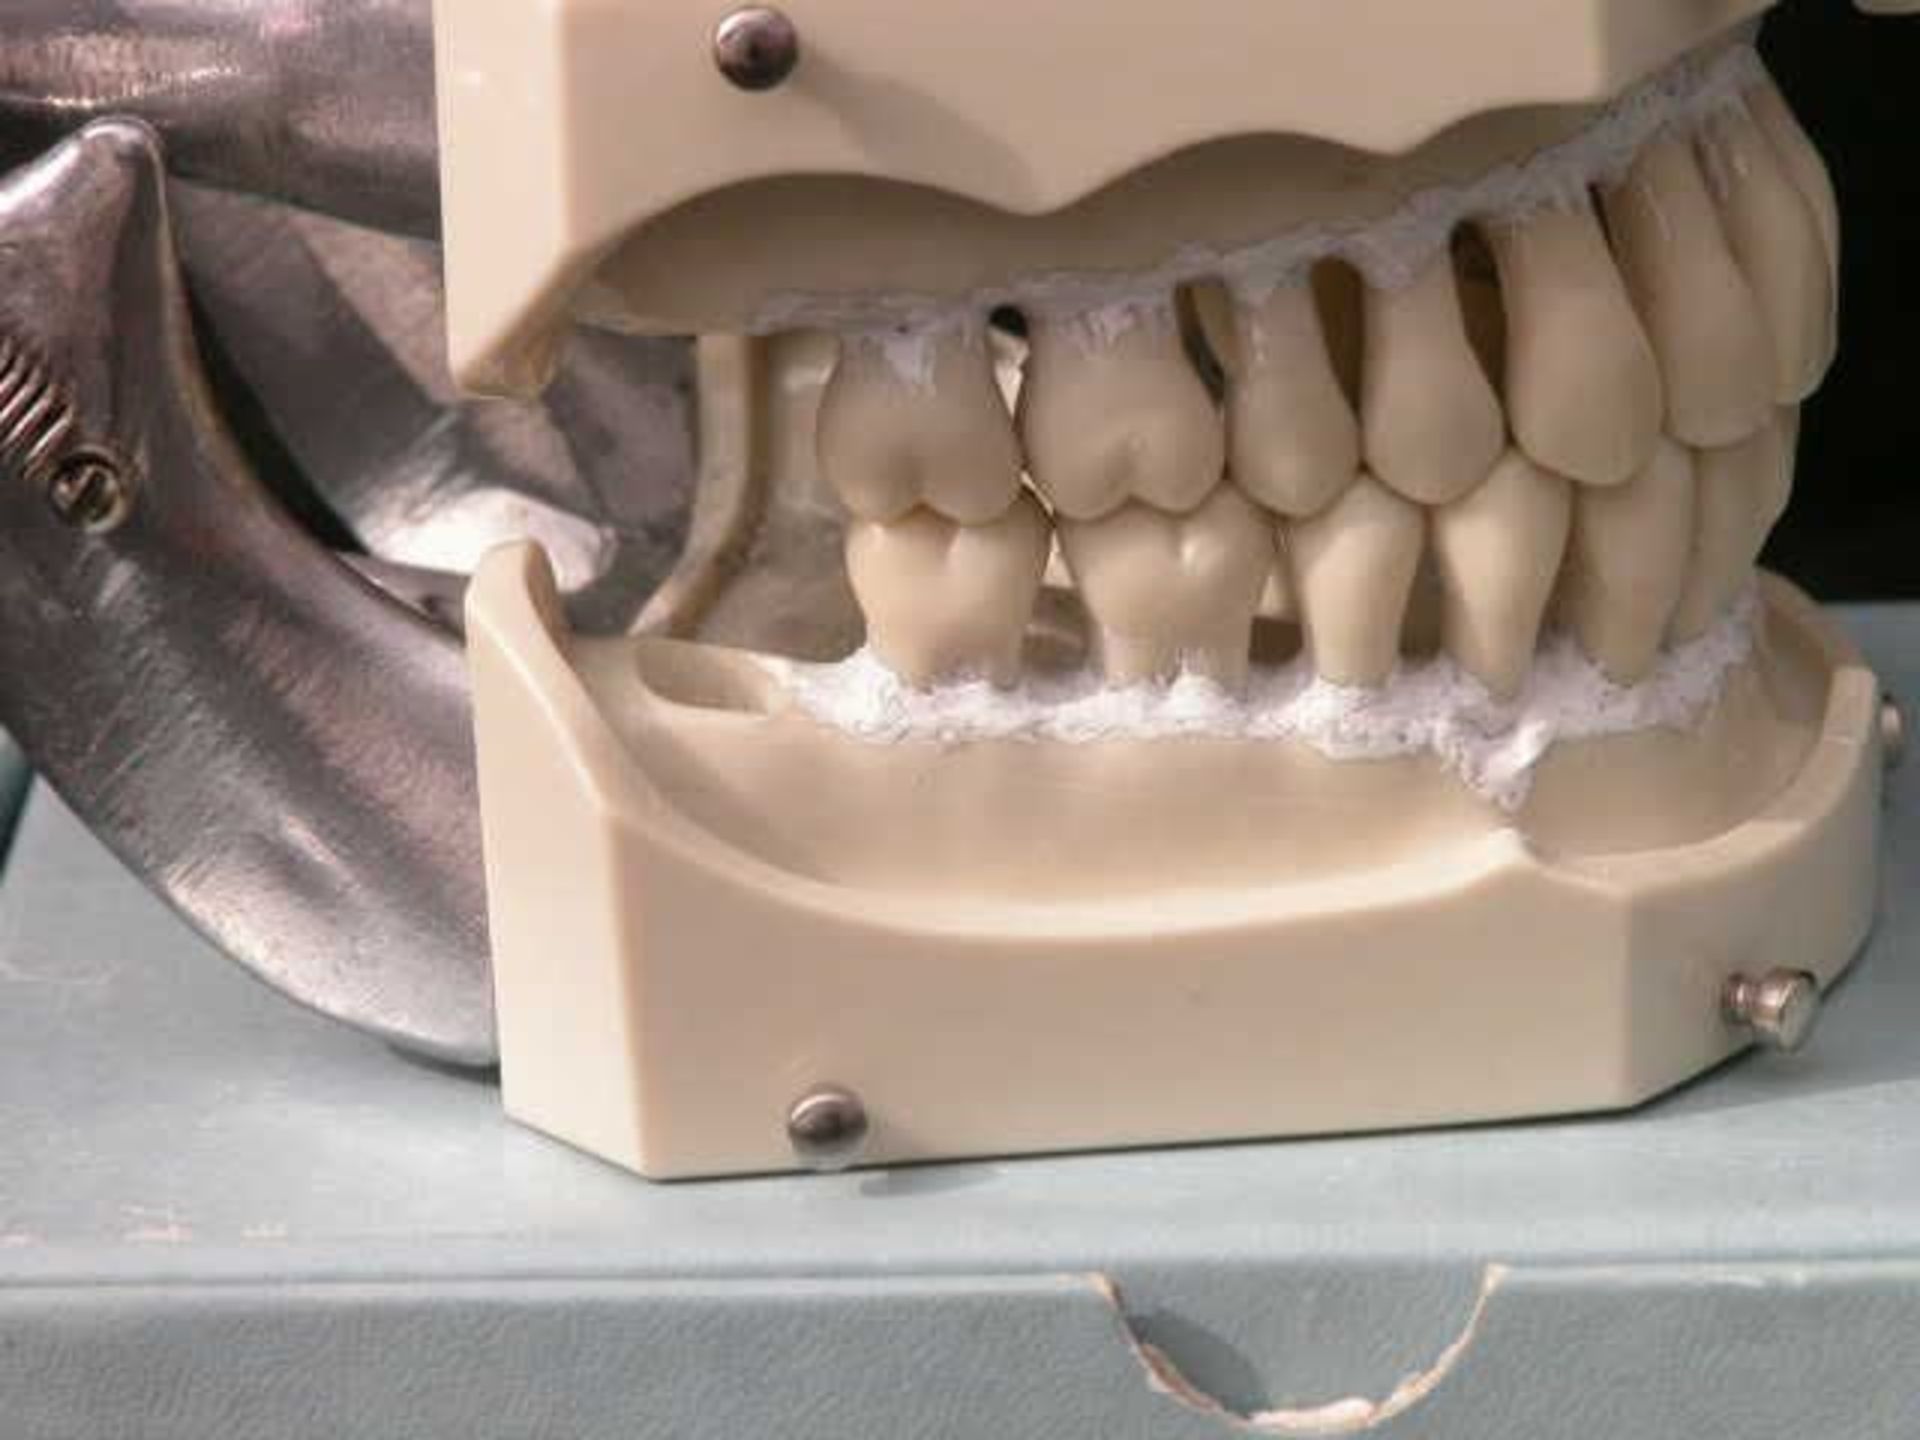 Columbia Dentiform Articulating Dental Model Removeable Teeth #2 4 Molars Gone, Qty 4, 330772226991 - Image 4 of 4